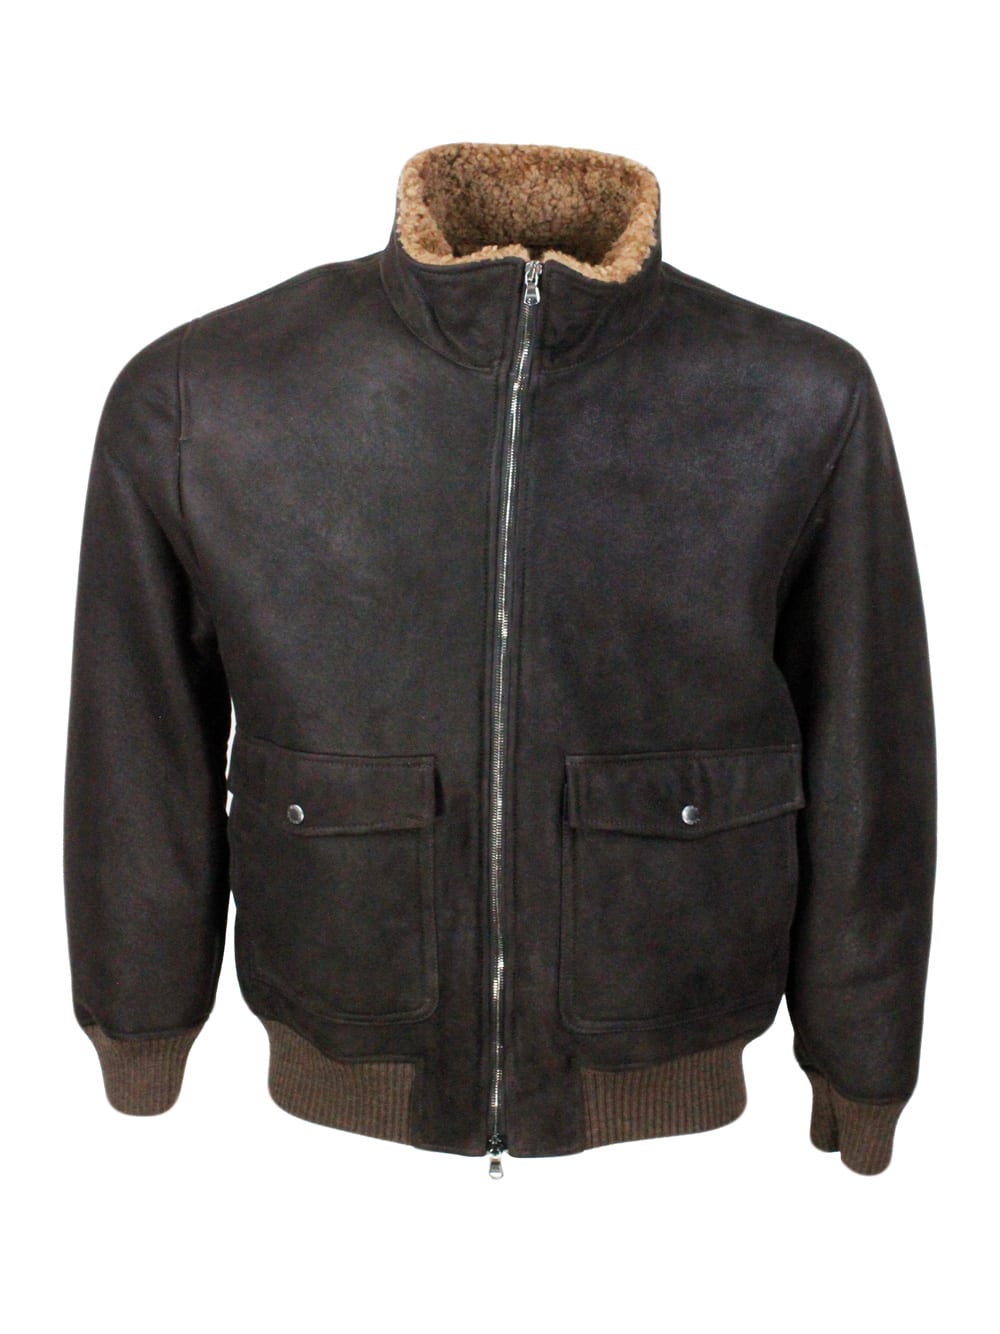 Barba Napoli Bomber Jacket In Fine And Soft Shearling Sheepskin With Stretch Knit Trims And Zip Closure. Front Po In Brown